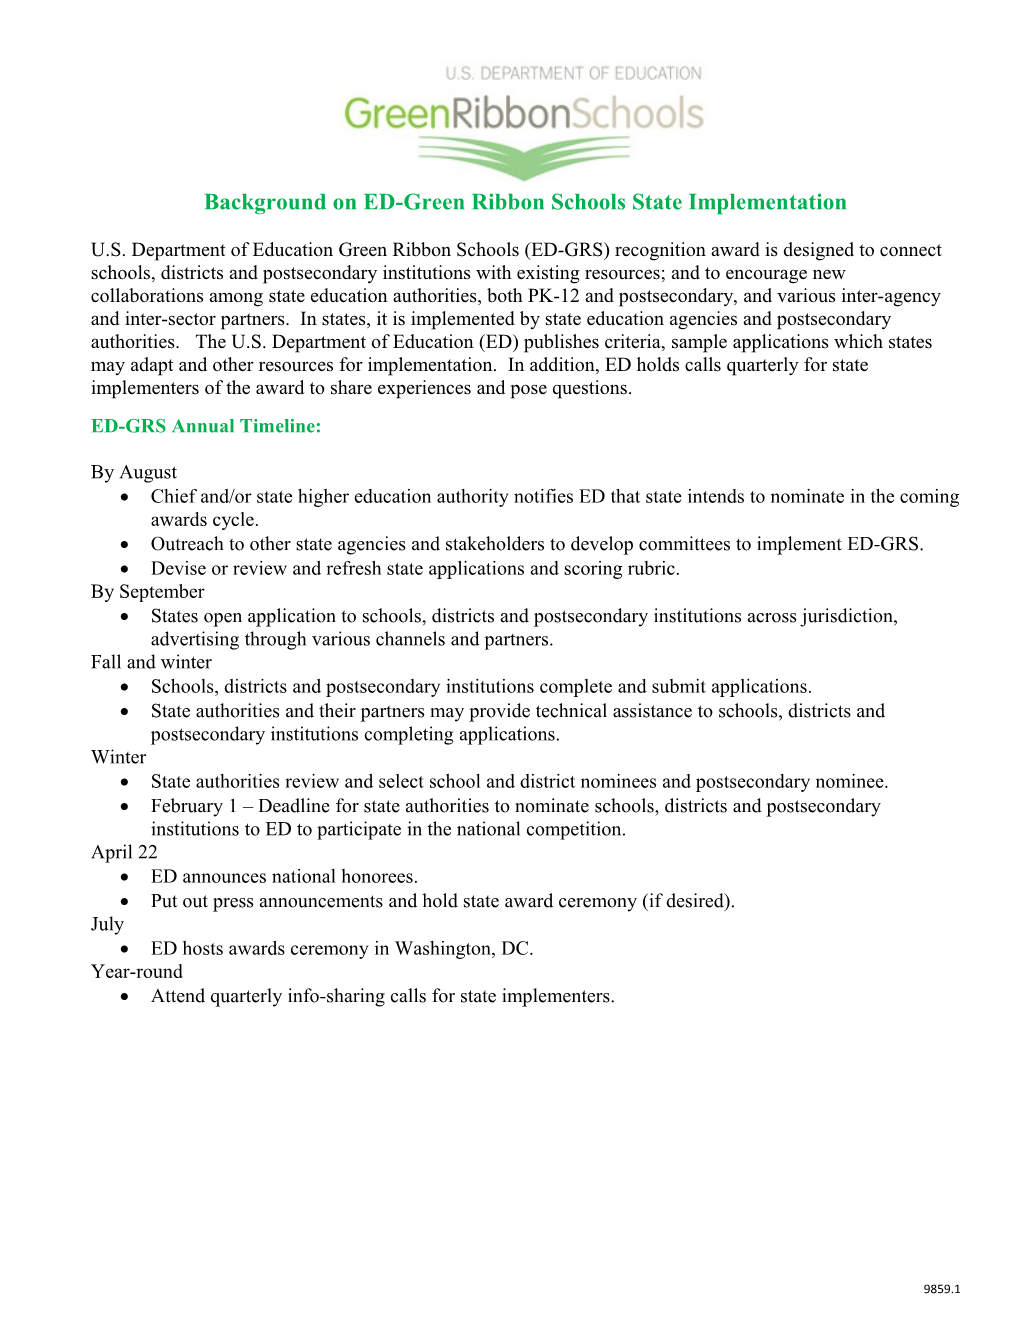 Background on ED-Green Ribbon Schools State Implementation (MS Word)